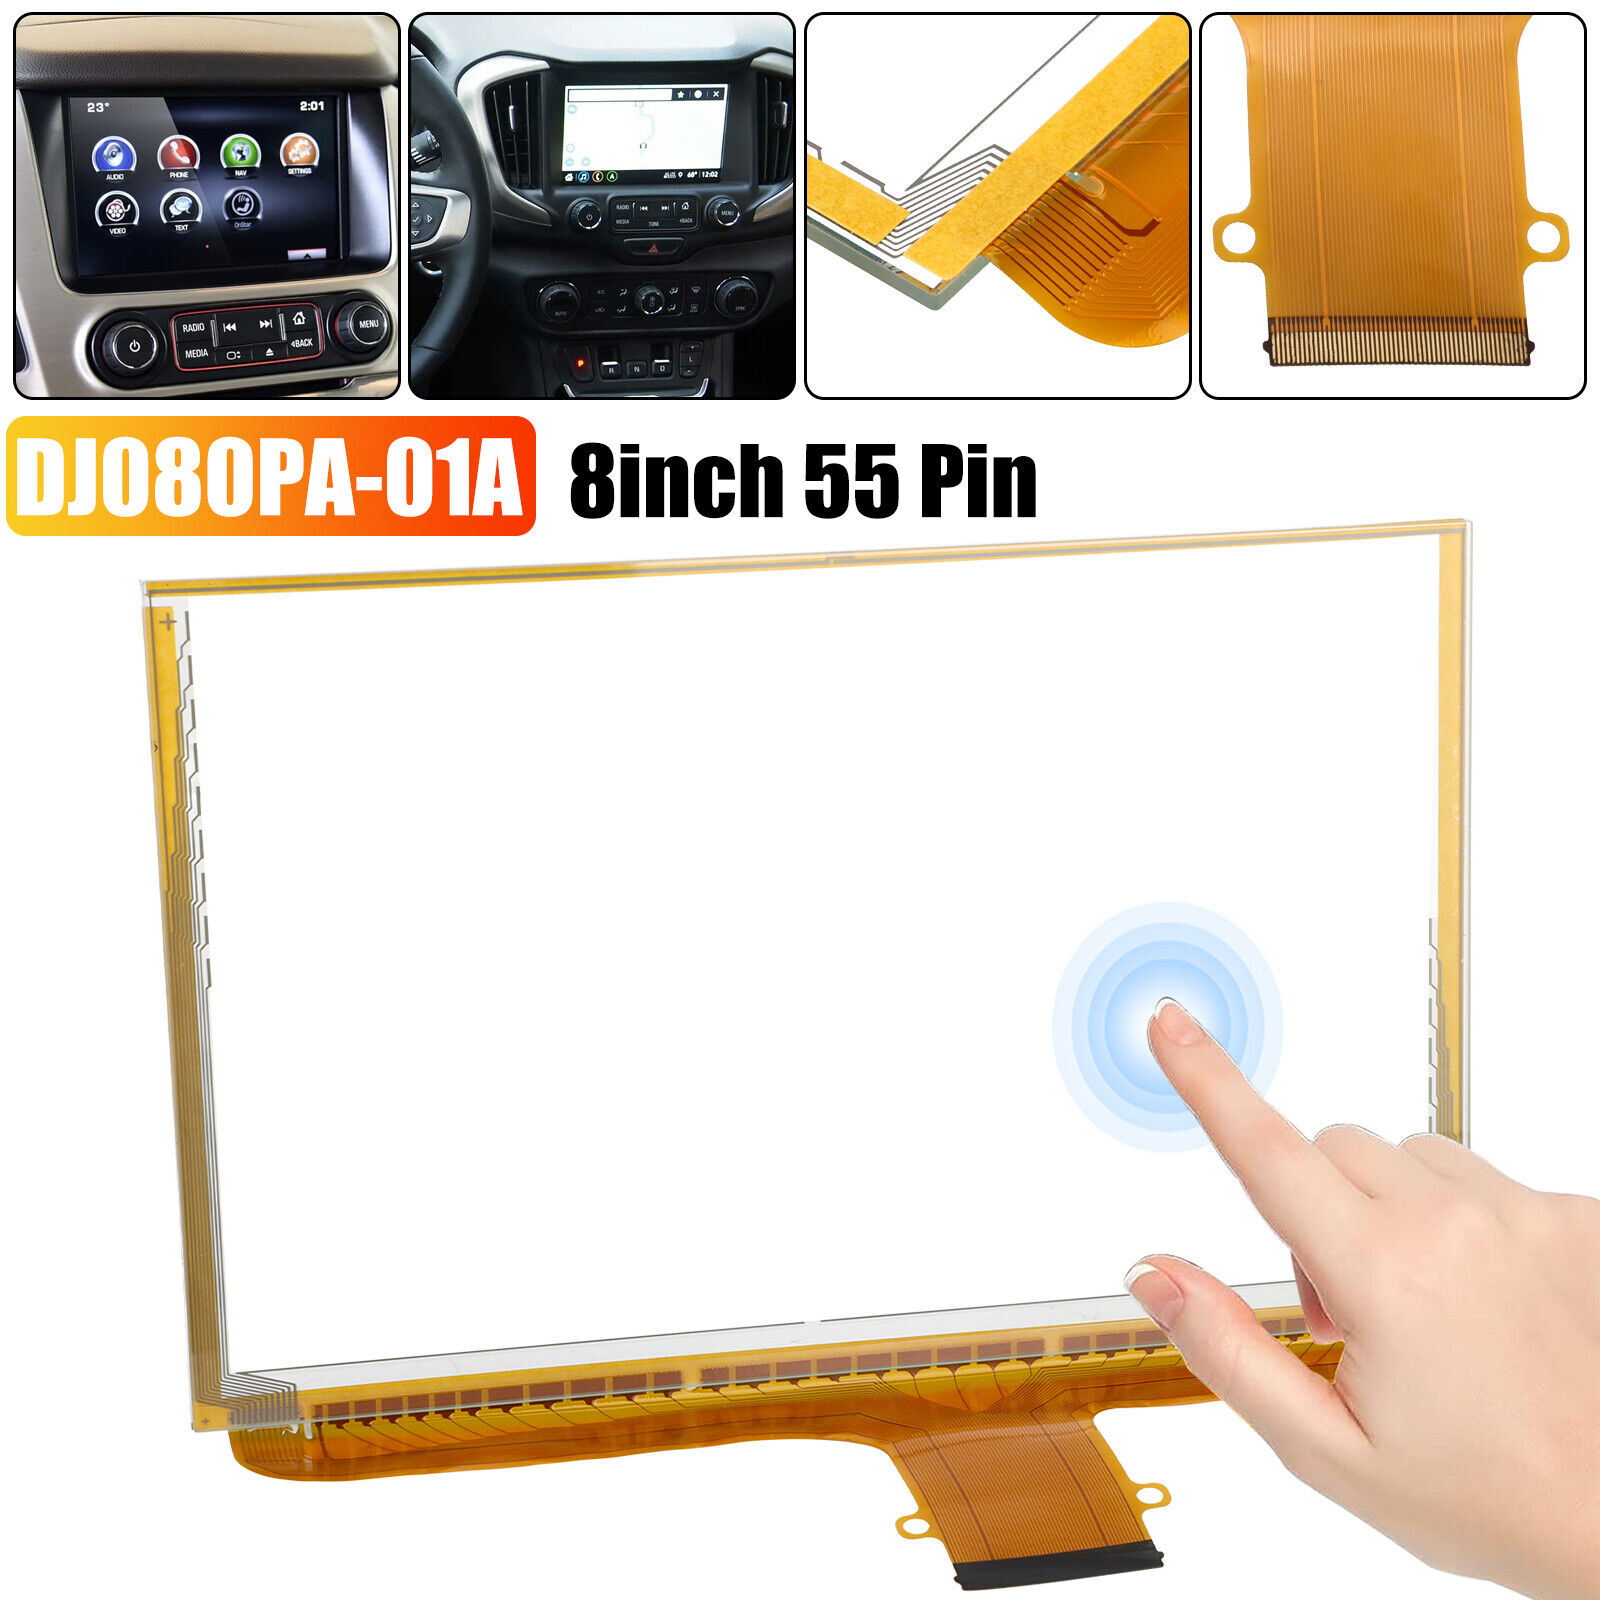 8inch 55Pin Touch-Screen Glass Digitizer DJ080PA-01A For 2015-2018 Chevrolet GMC